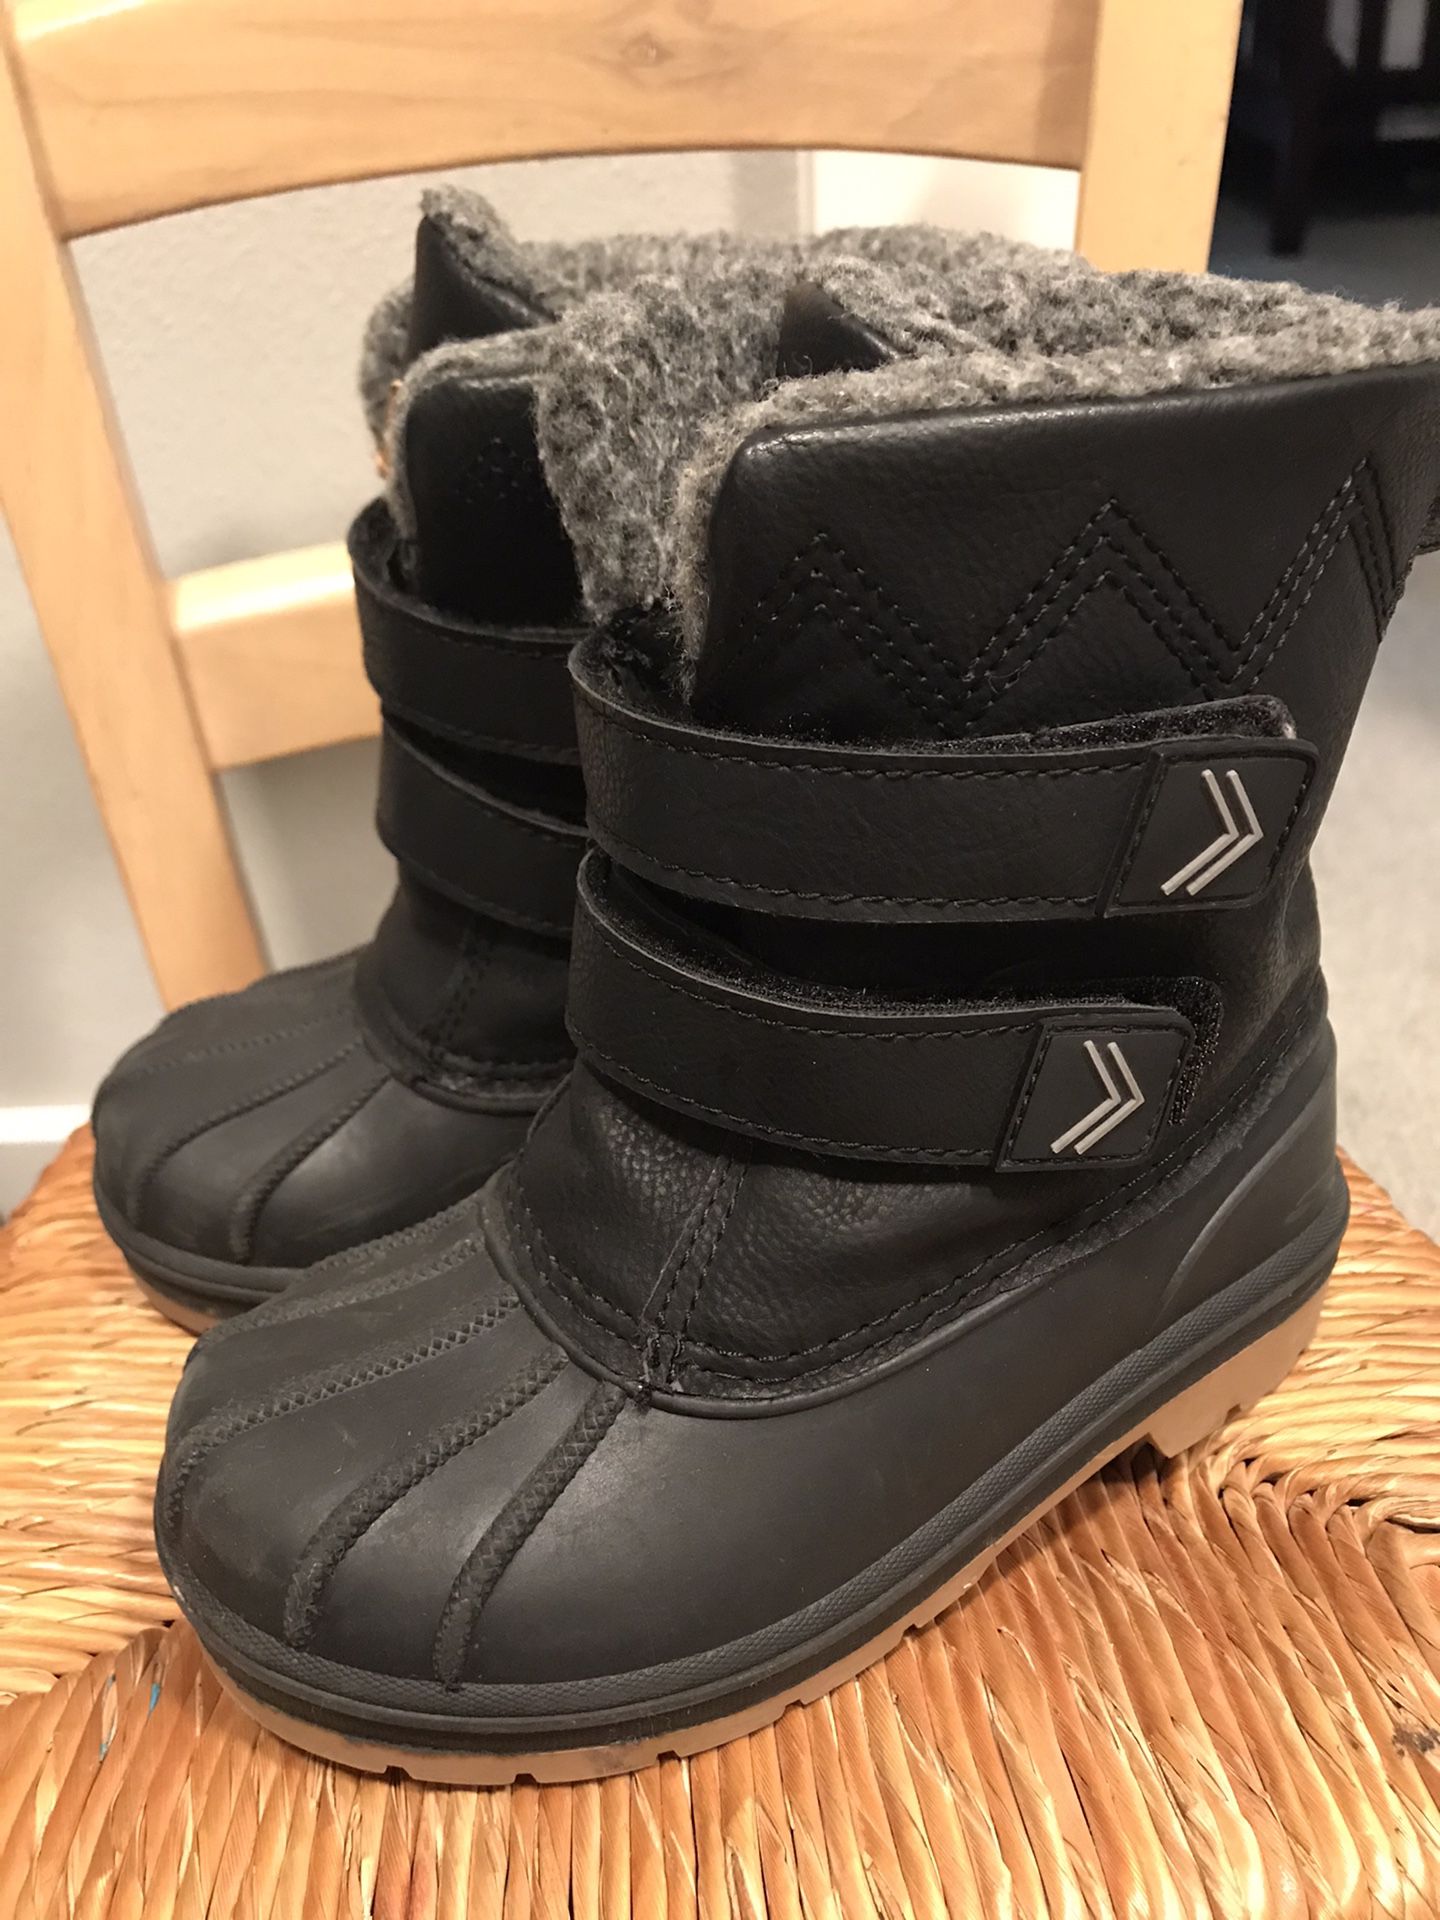 Toddlers Cat & Jack snow boots